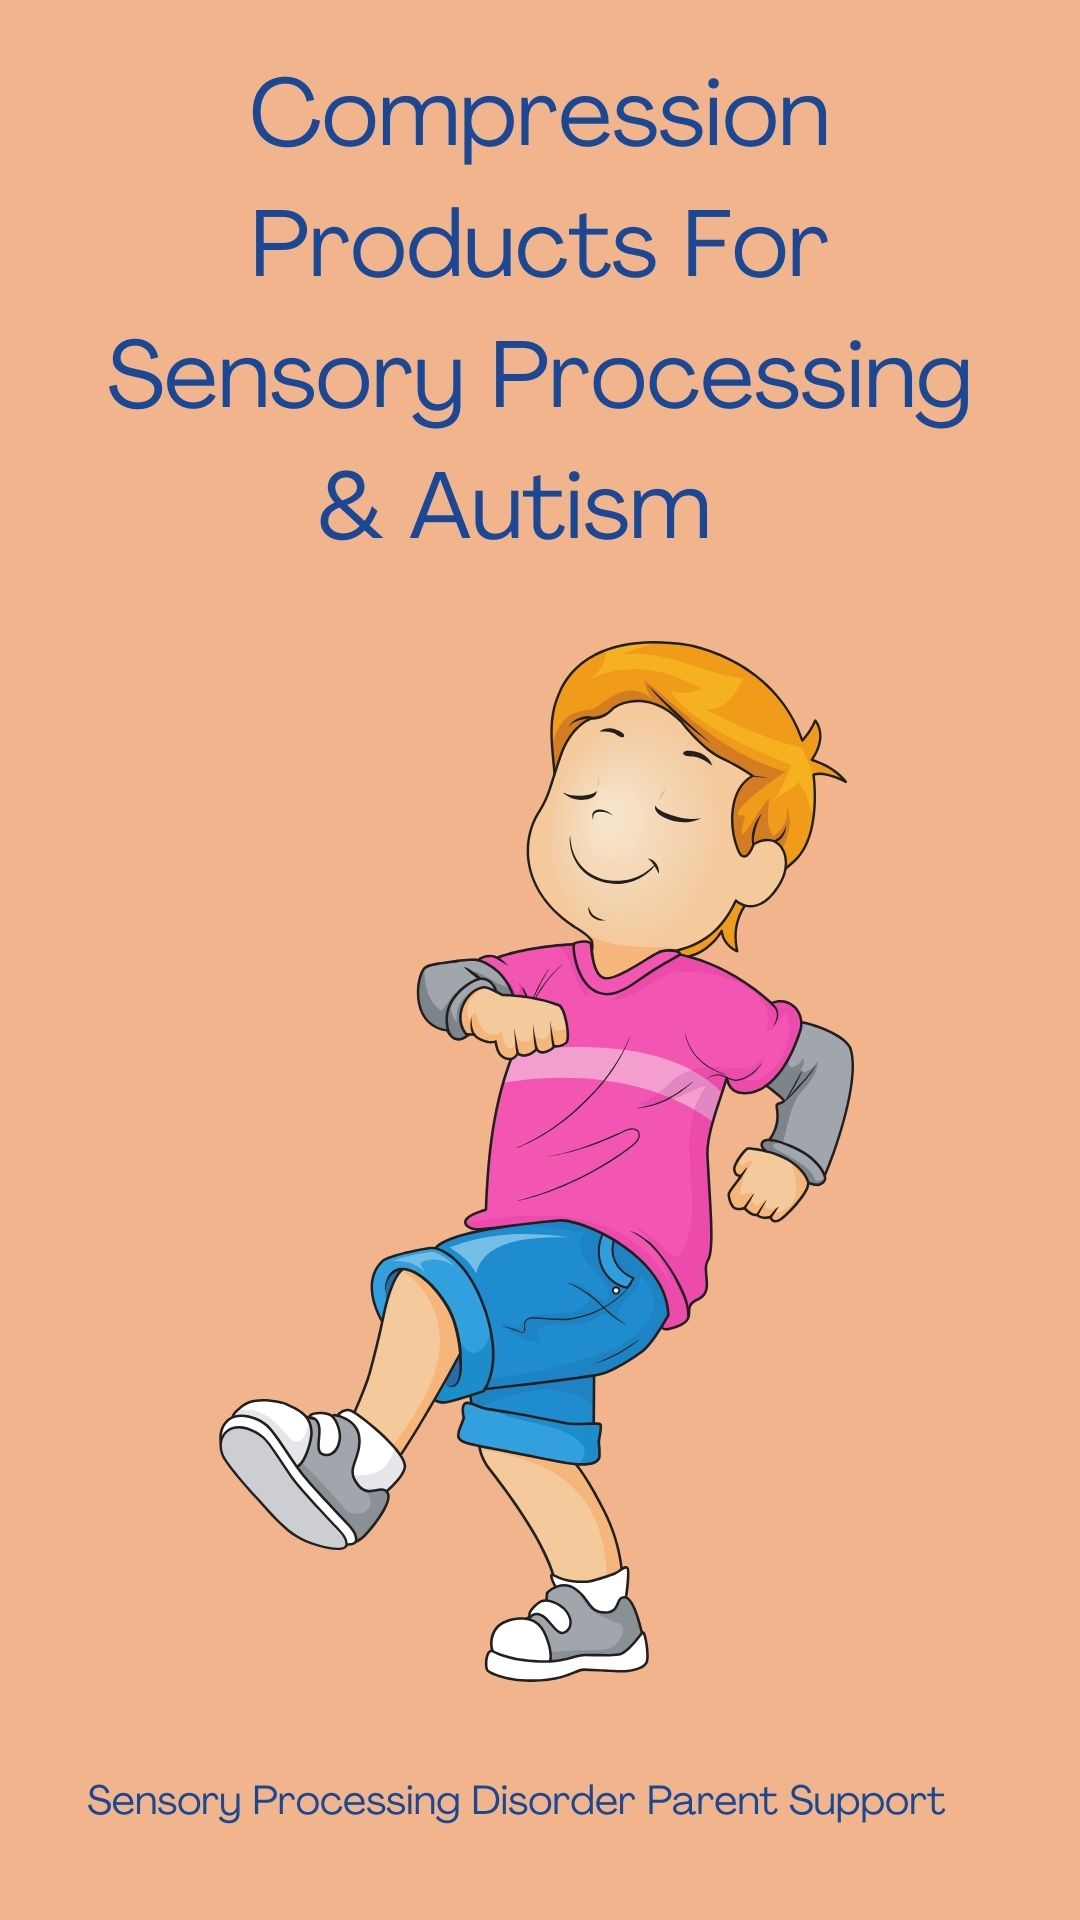 Compression Products For Sensory Processing & Autism